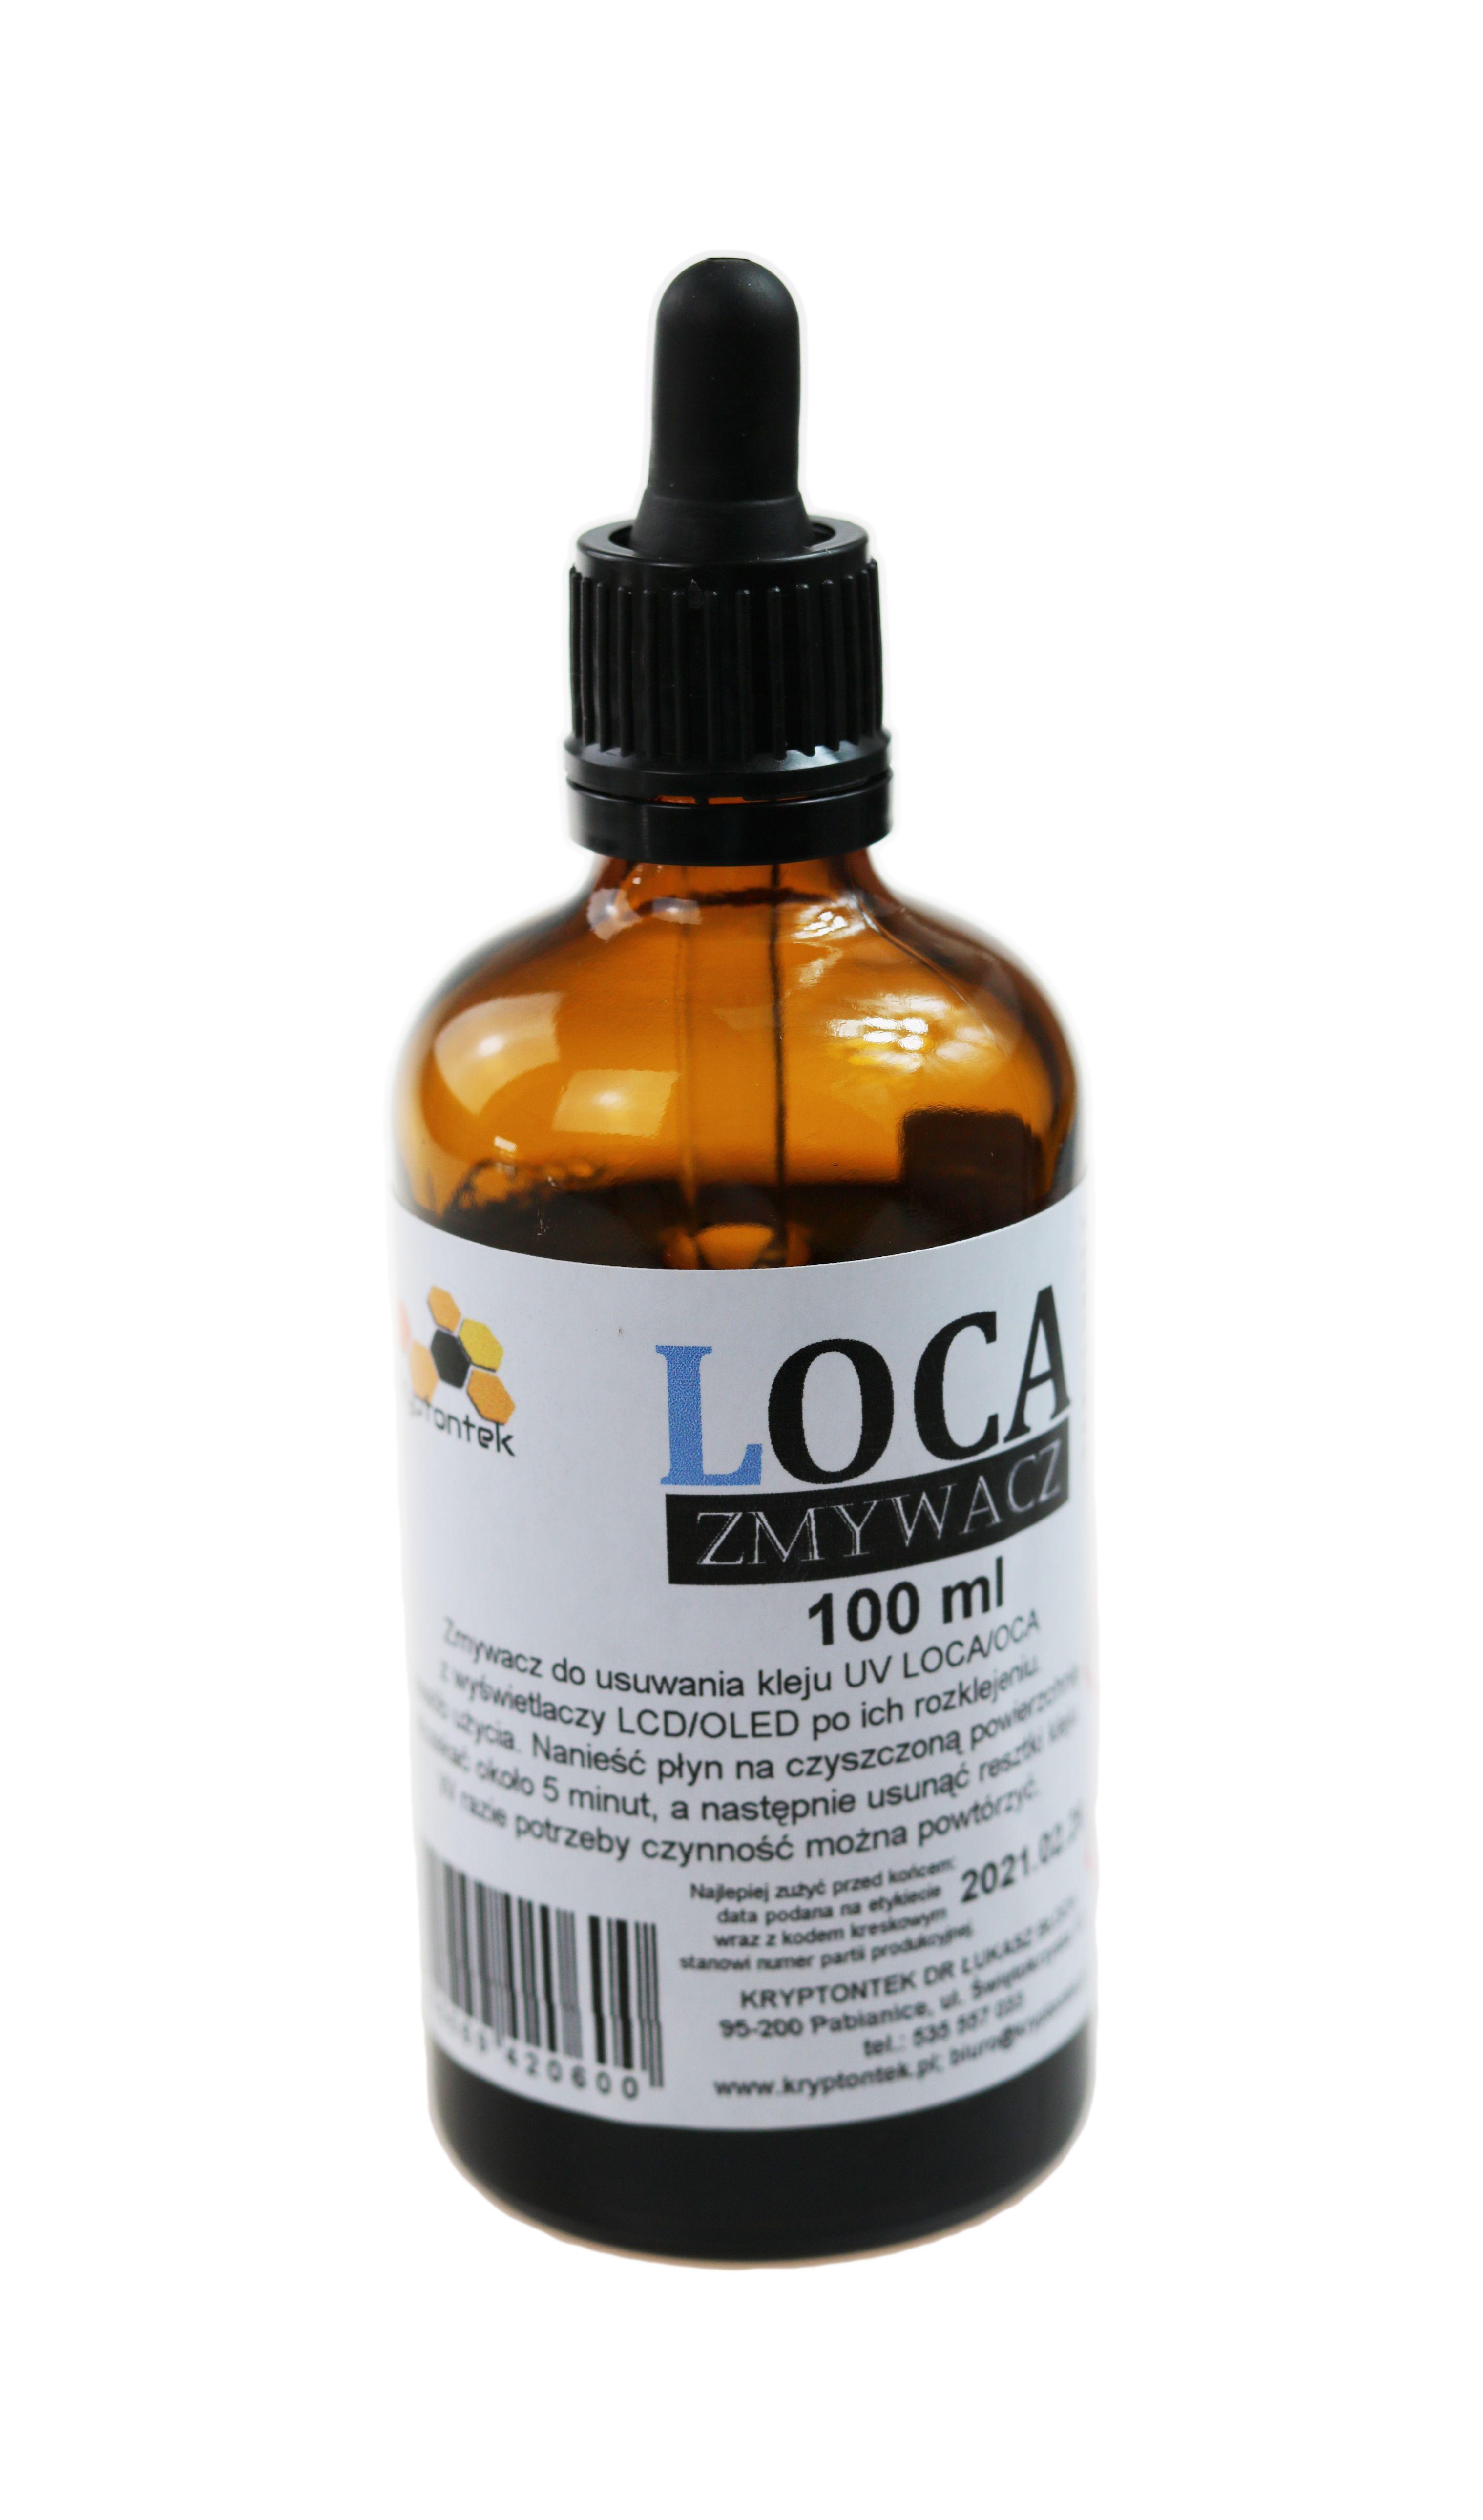 LOCA 100ml cleaner with a pipette